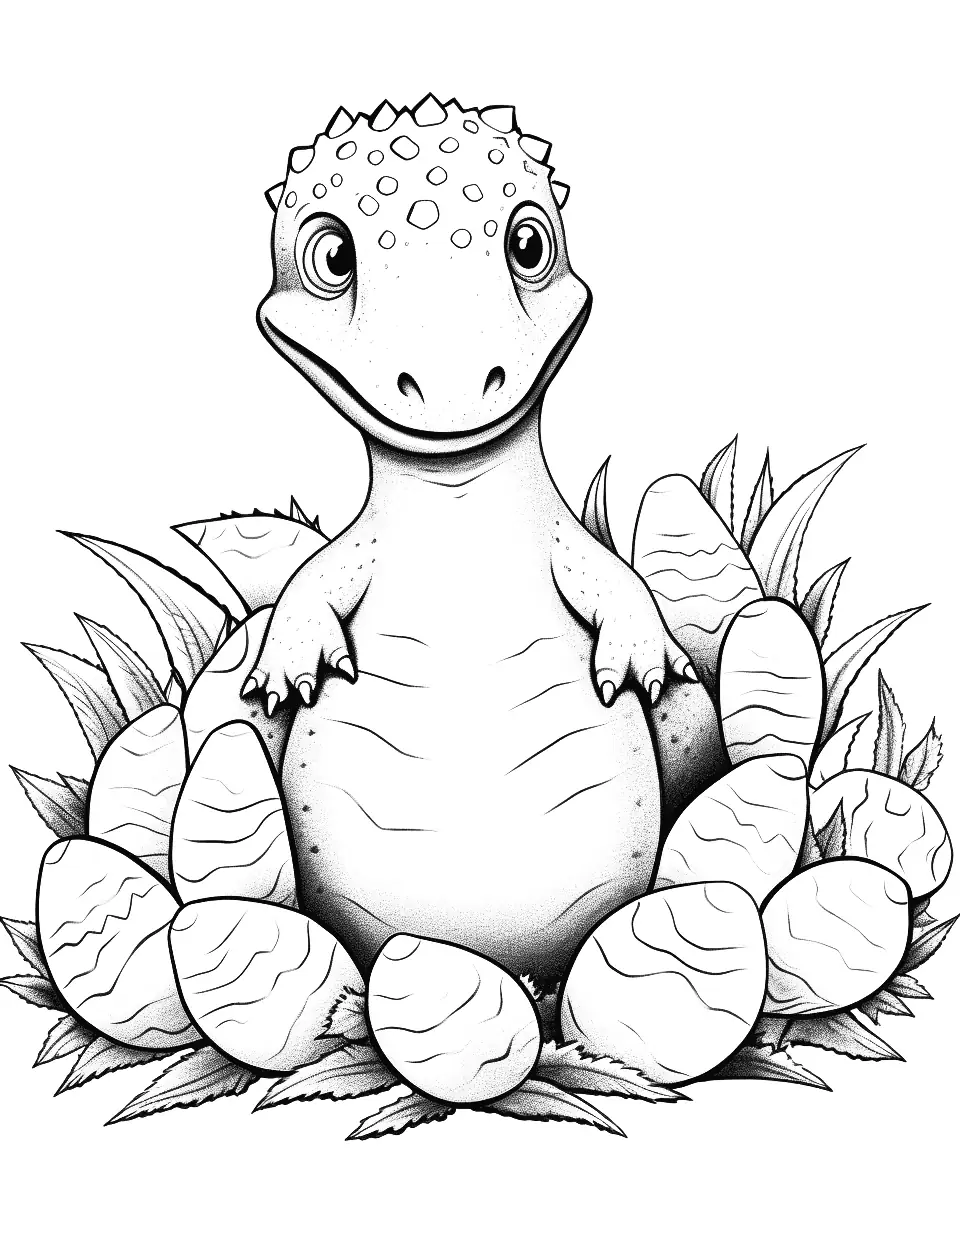 Baby Dino Hatchlings Dinosaur Coloring Page - Baby dinosaur hatchlings emerging from their eggs.